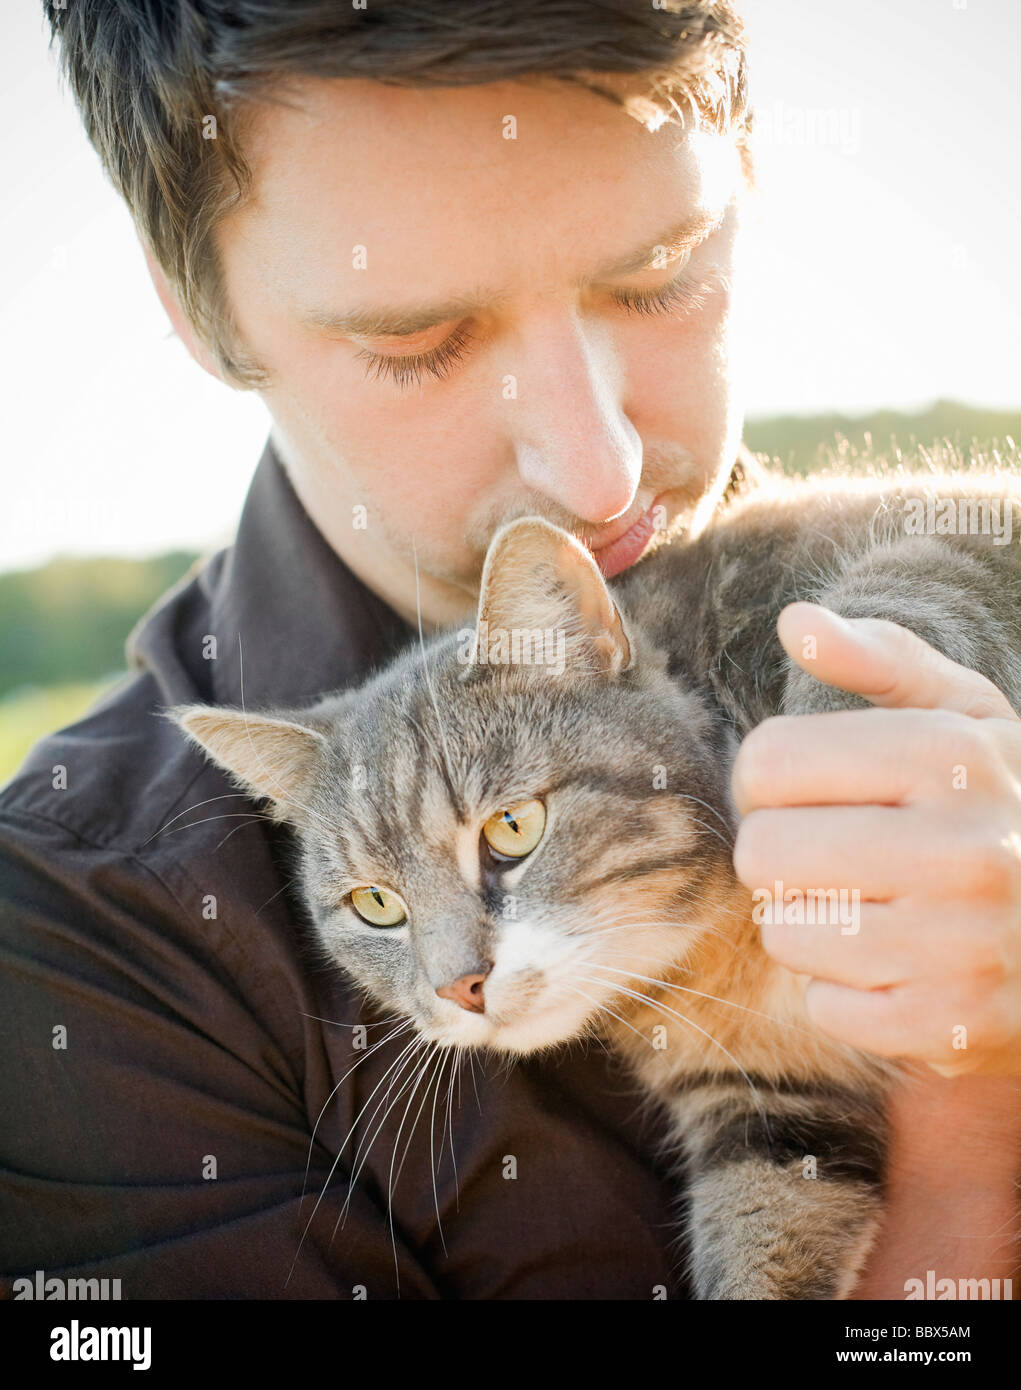 A young man holding a cat Sweden. Stock Photo